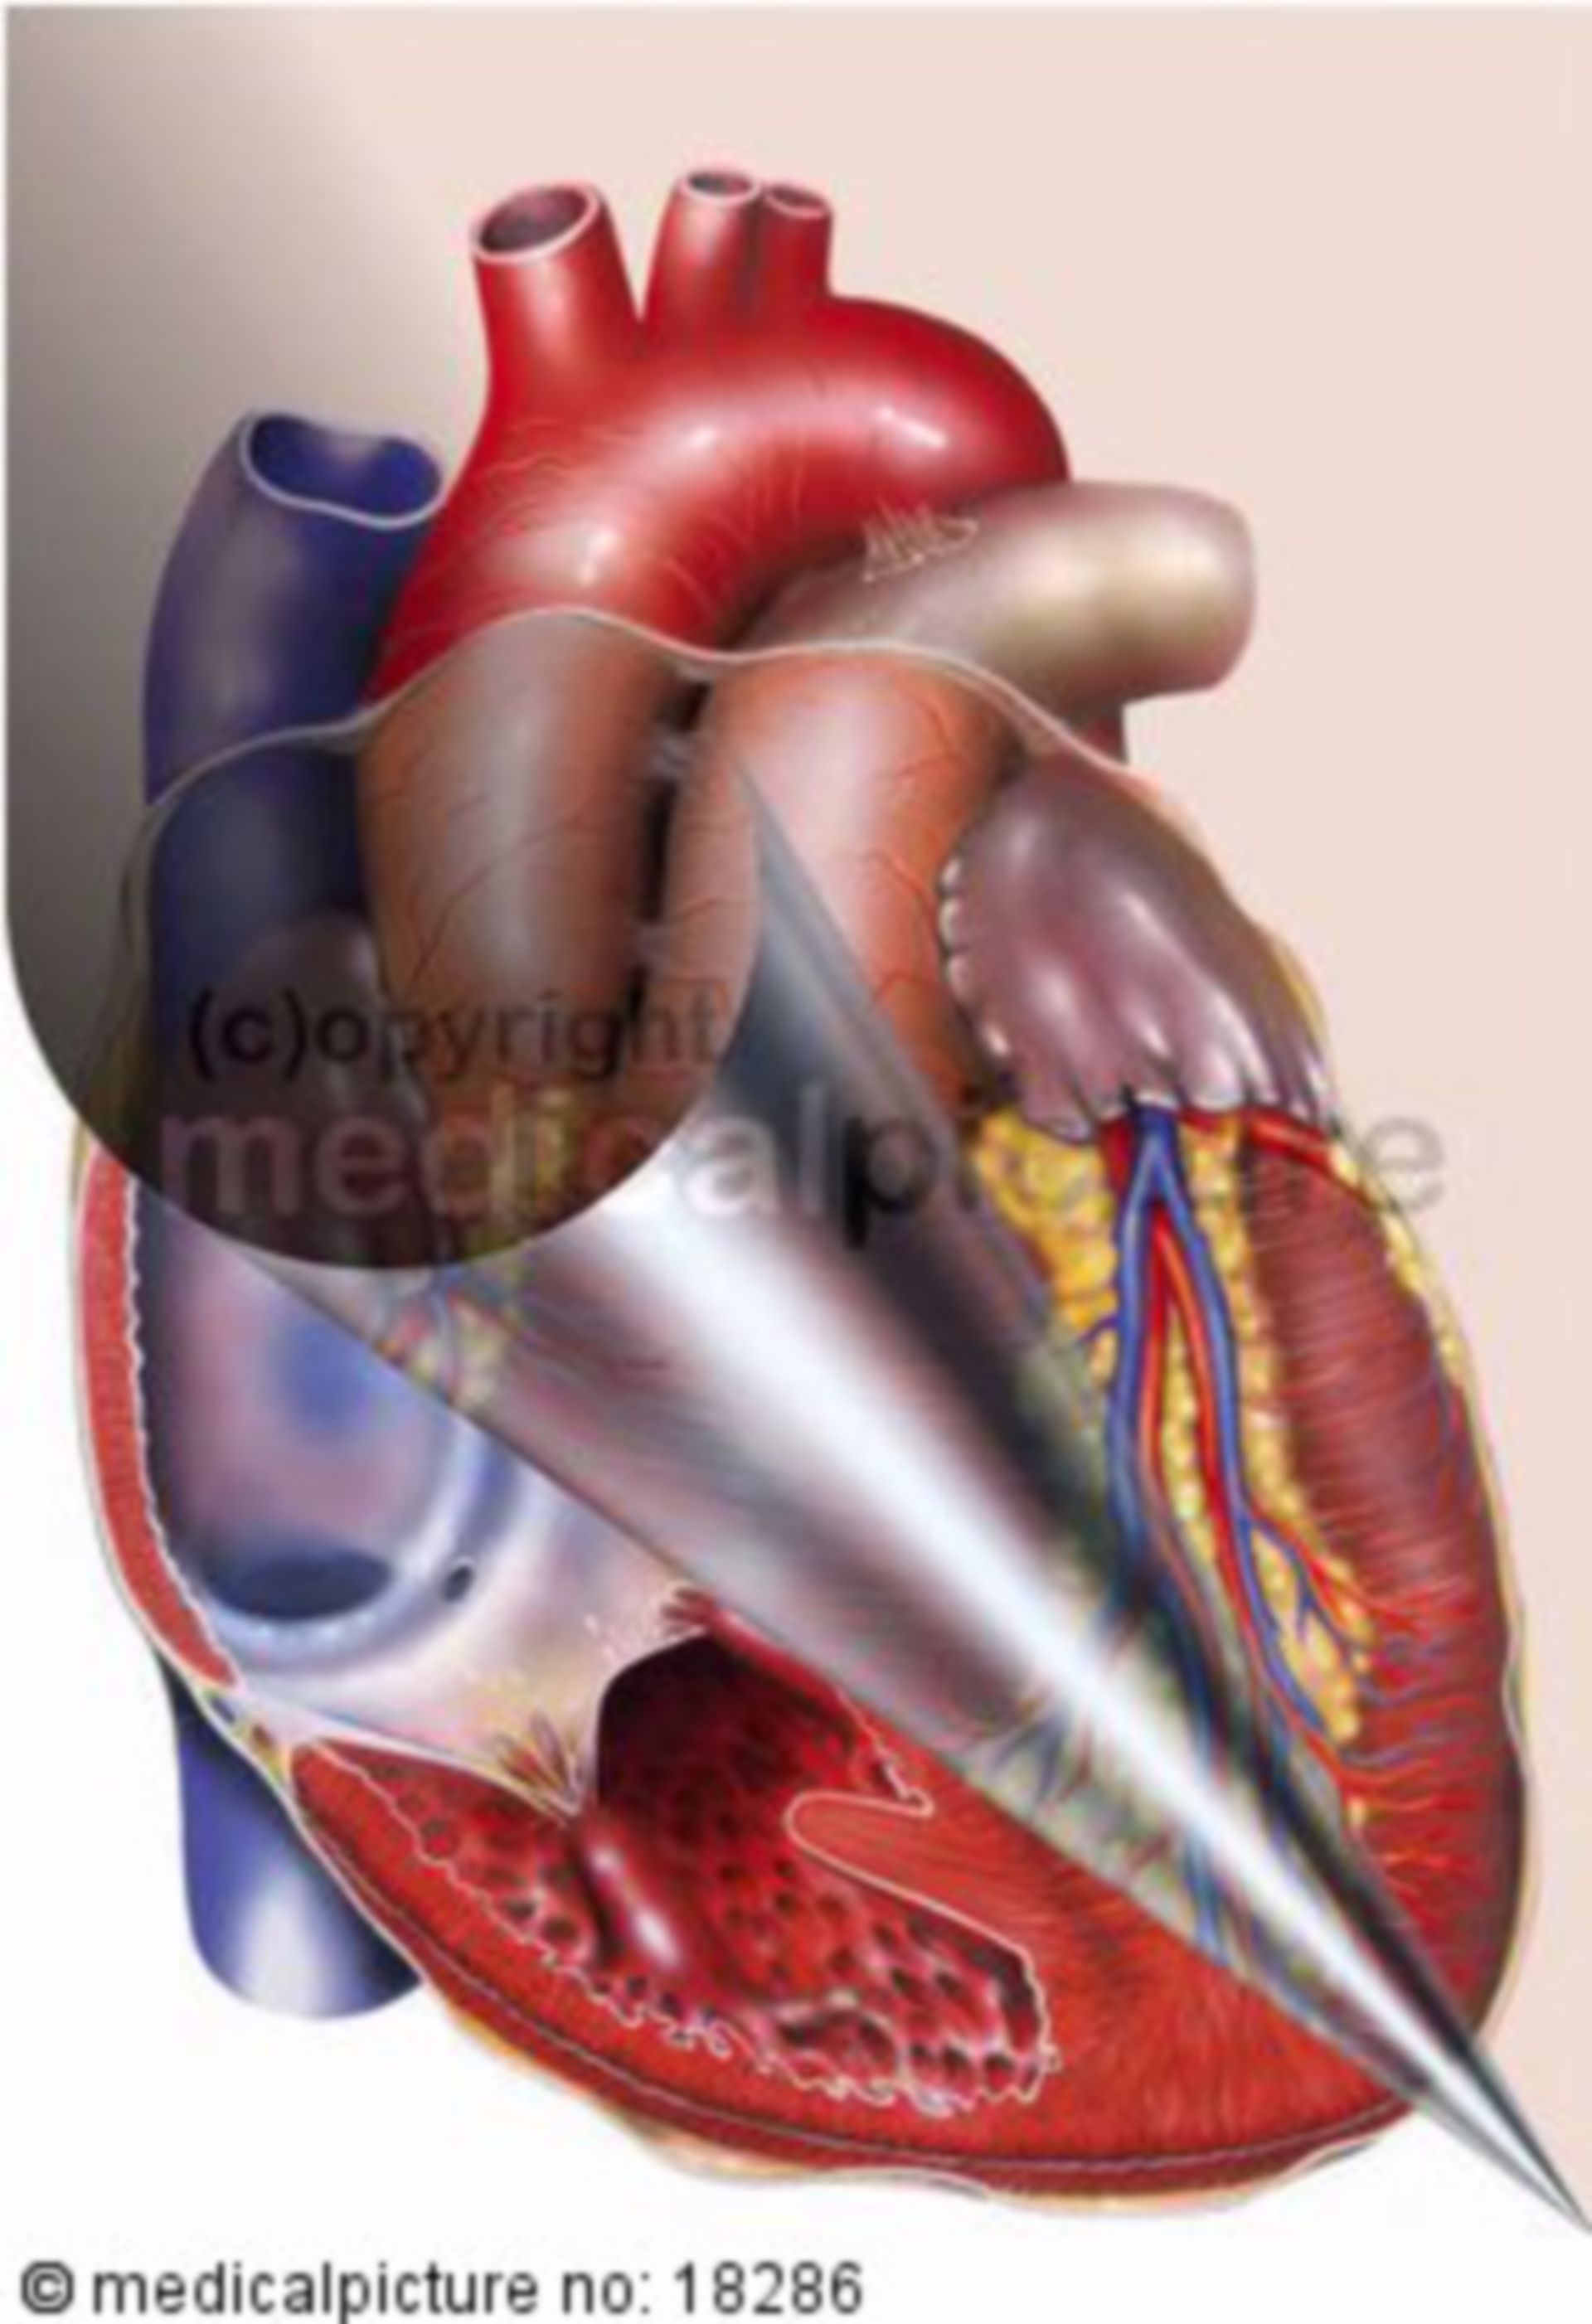 Right ventricle